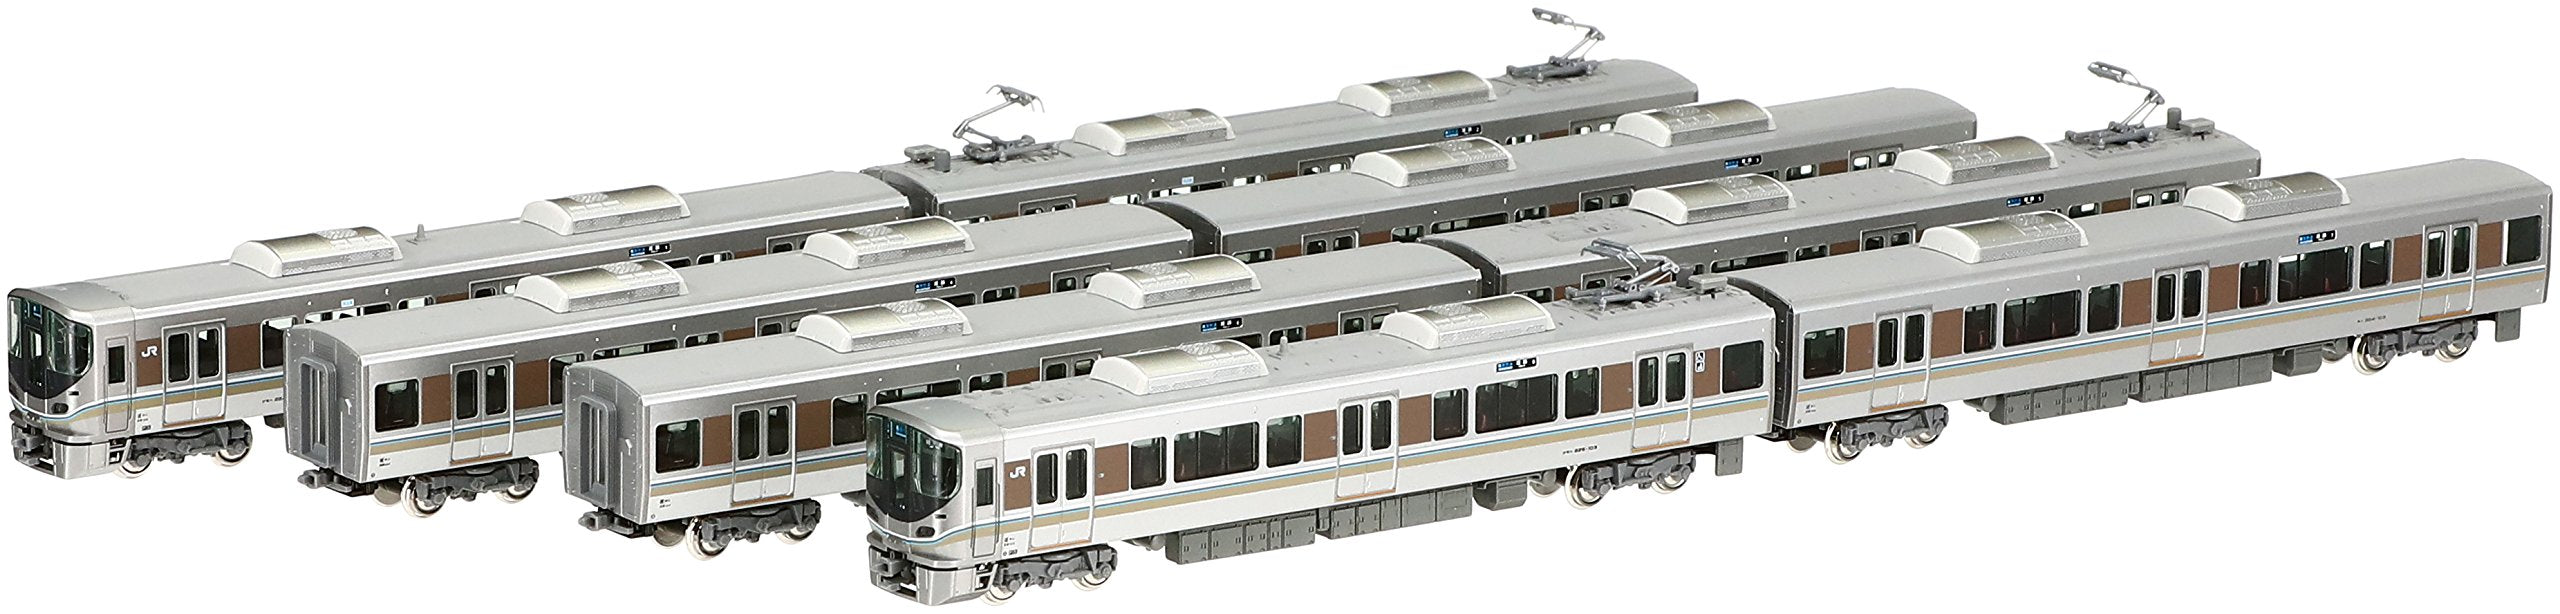 KATO 10-1439 Series 225-100 'Special Rapid Service' 8 Cars Set N Scale